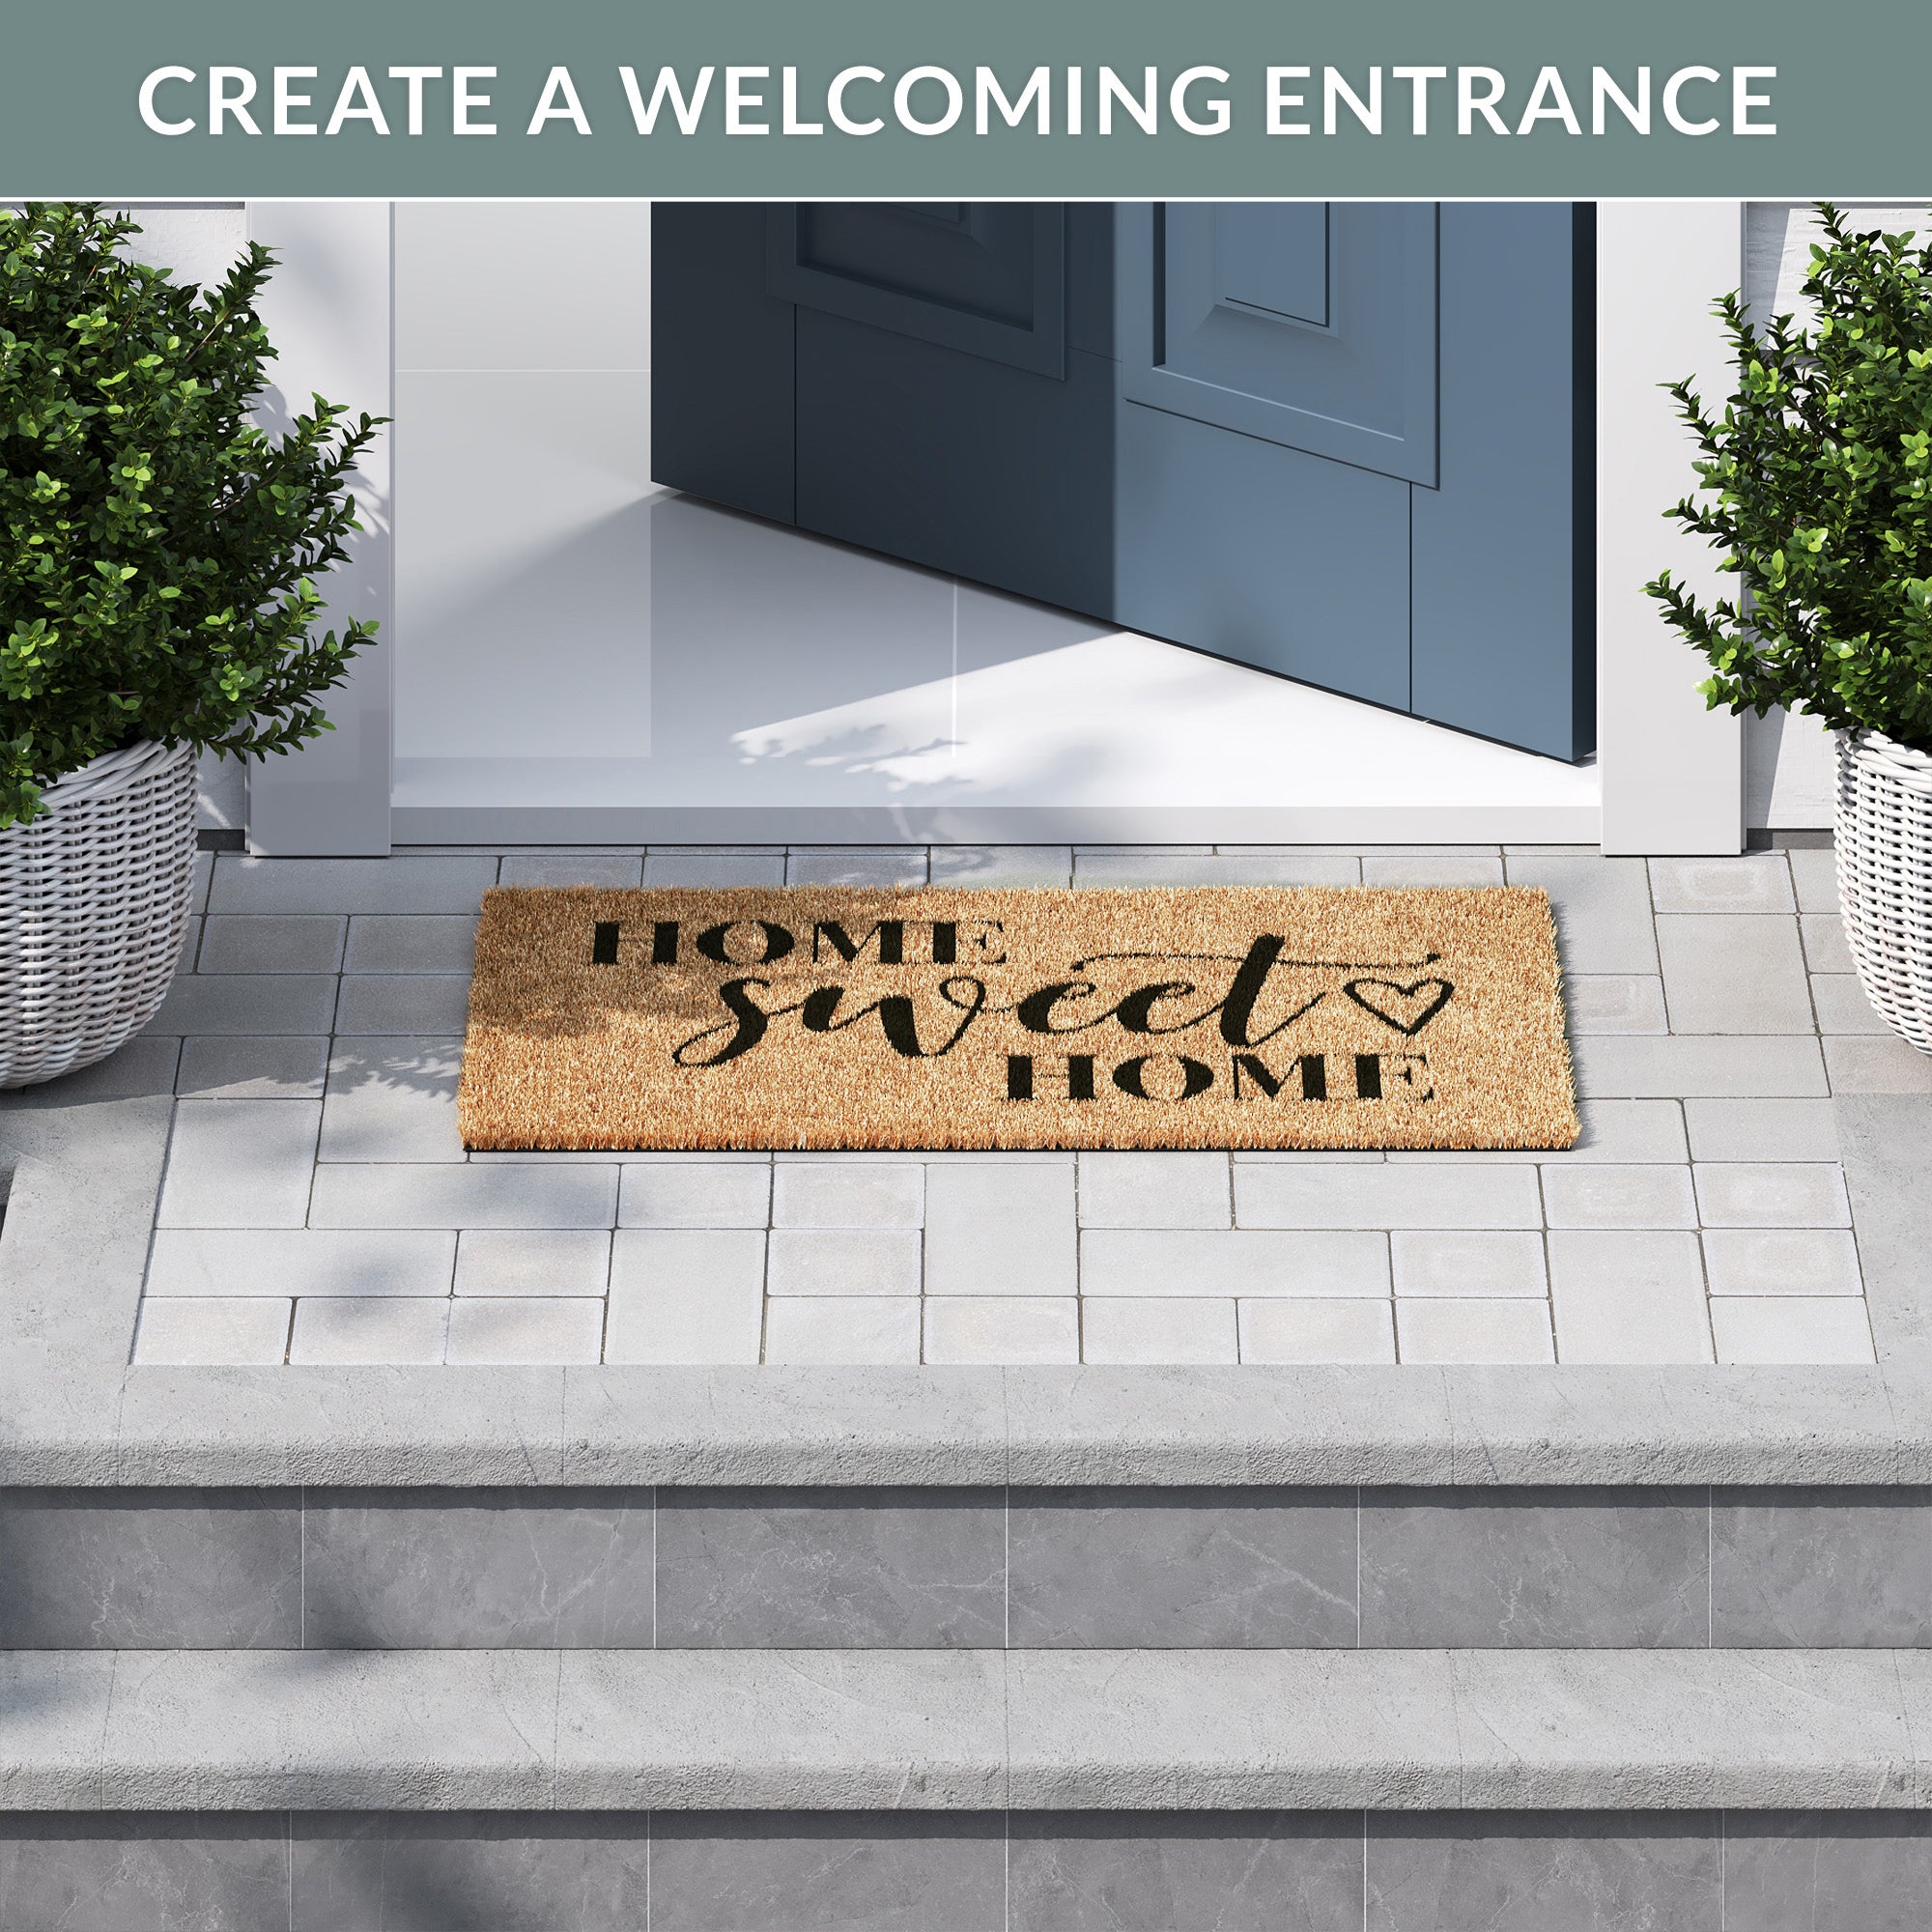 DECOREALM Home Sweet Home Farmhouse Welcome Mat - Durable Coir Doormat -  Cute Welcome Mats for Front Door, Outside Porch or Entrance, Indoor Outdoor